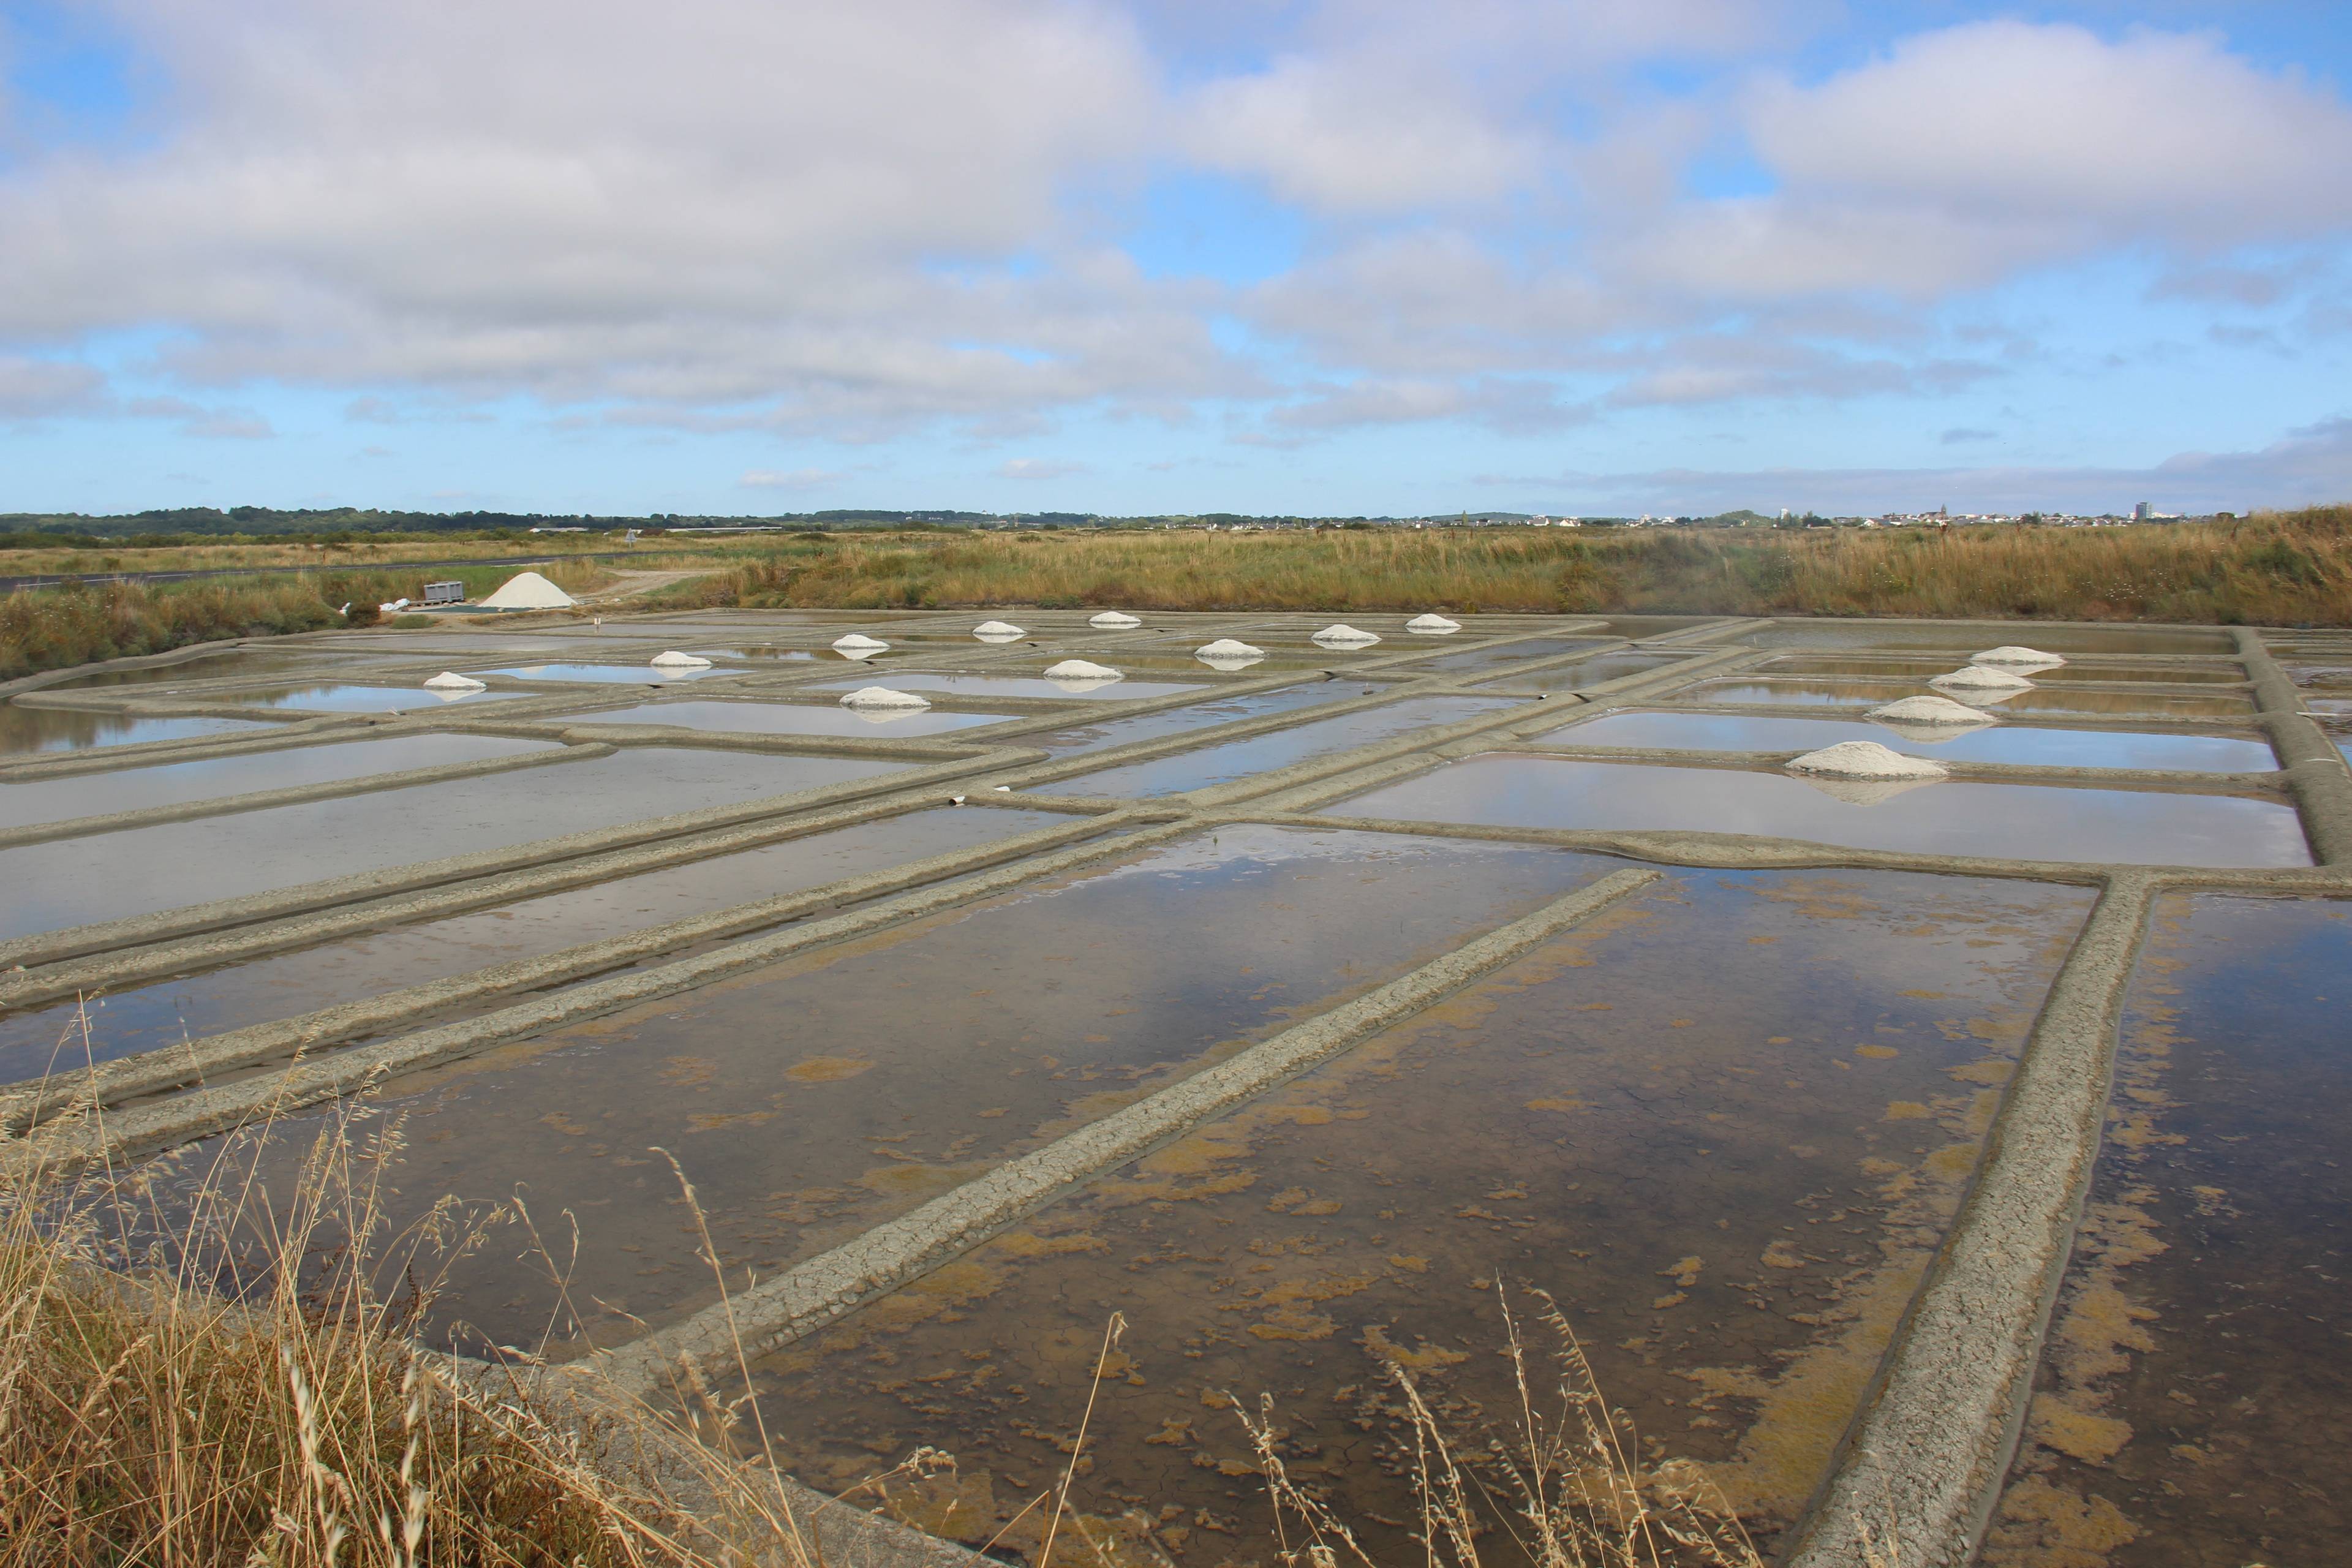 From Le Croisic to the Salt Marshes of Guerande